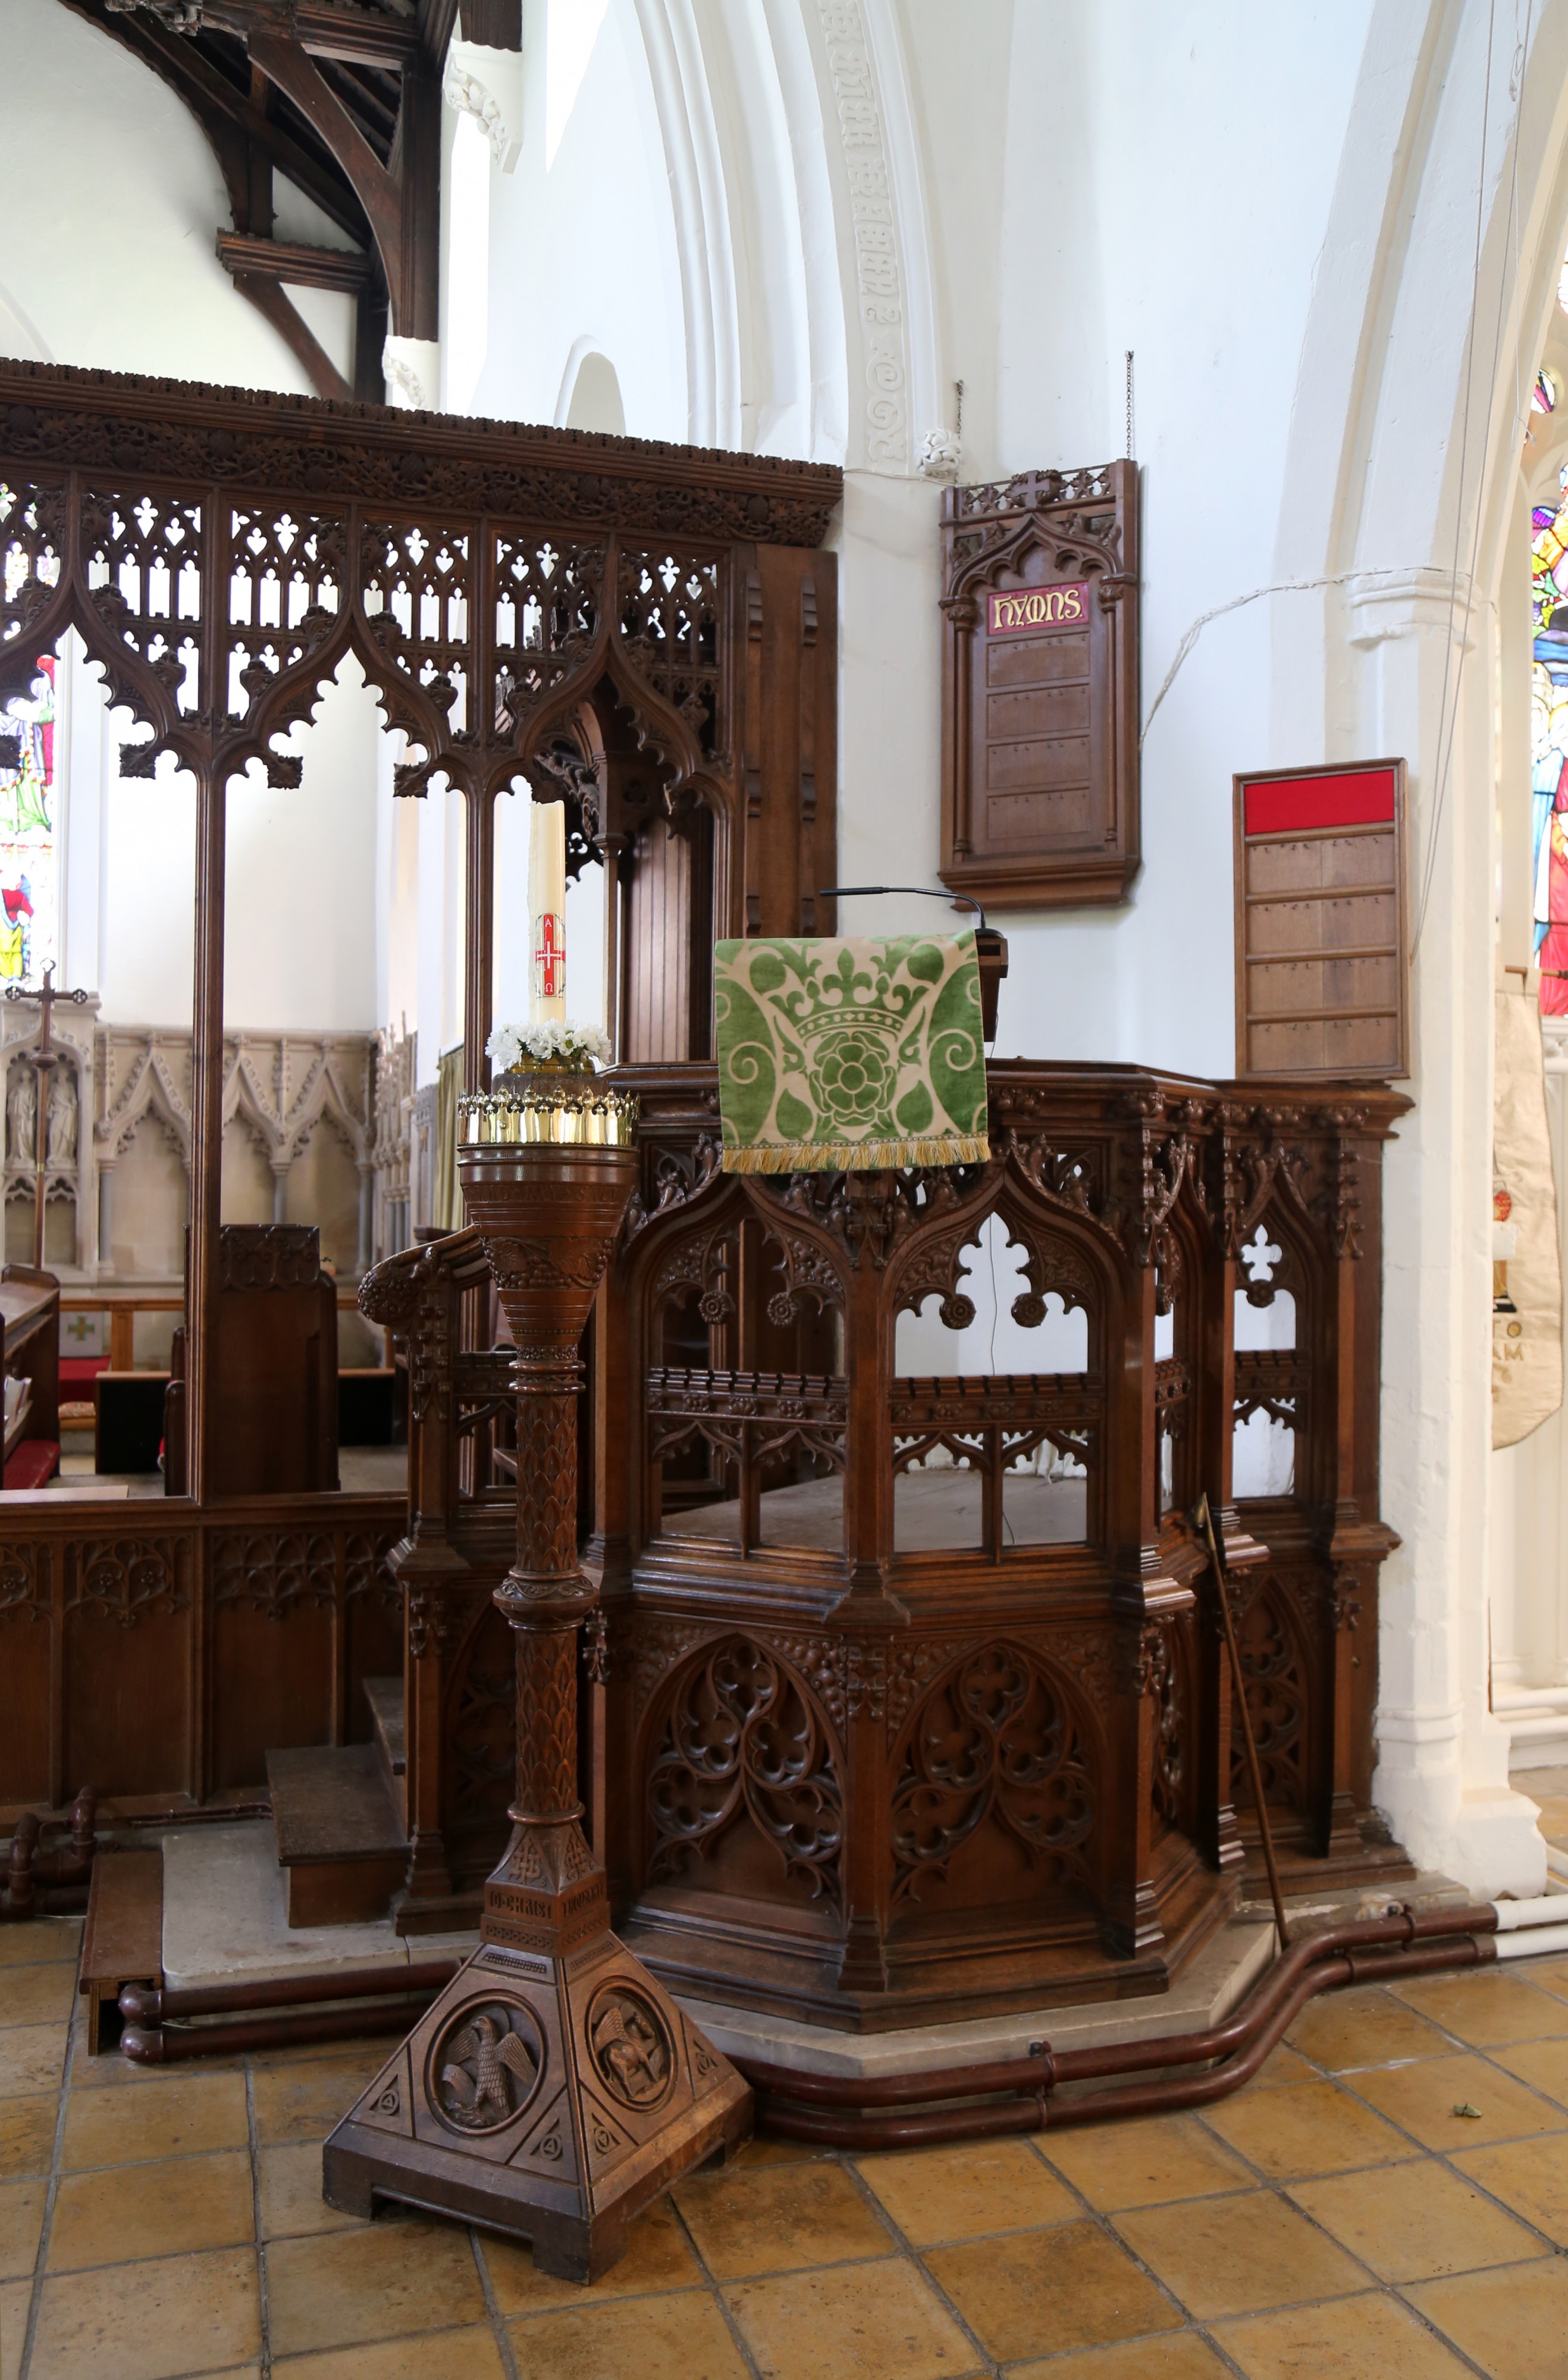 Church of Ss Mary & Lawrence interior - pulpit and bay screen between nave and aisle